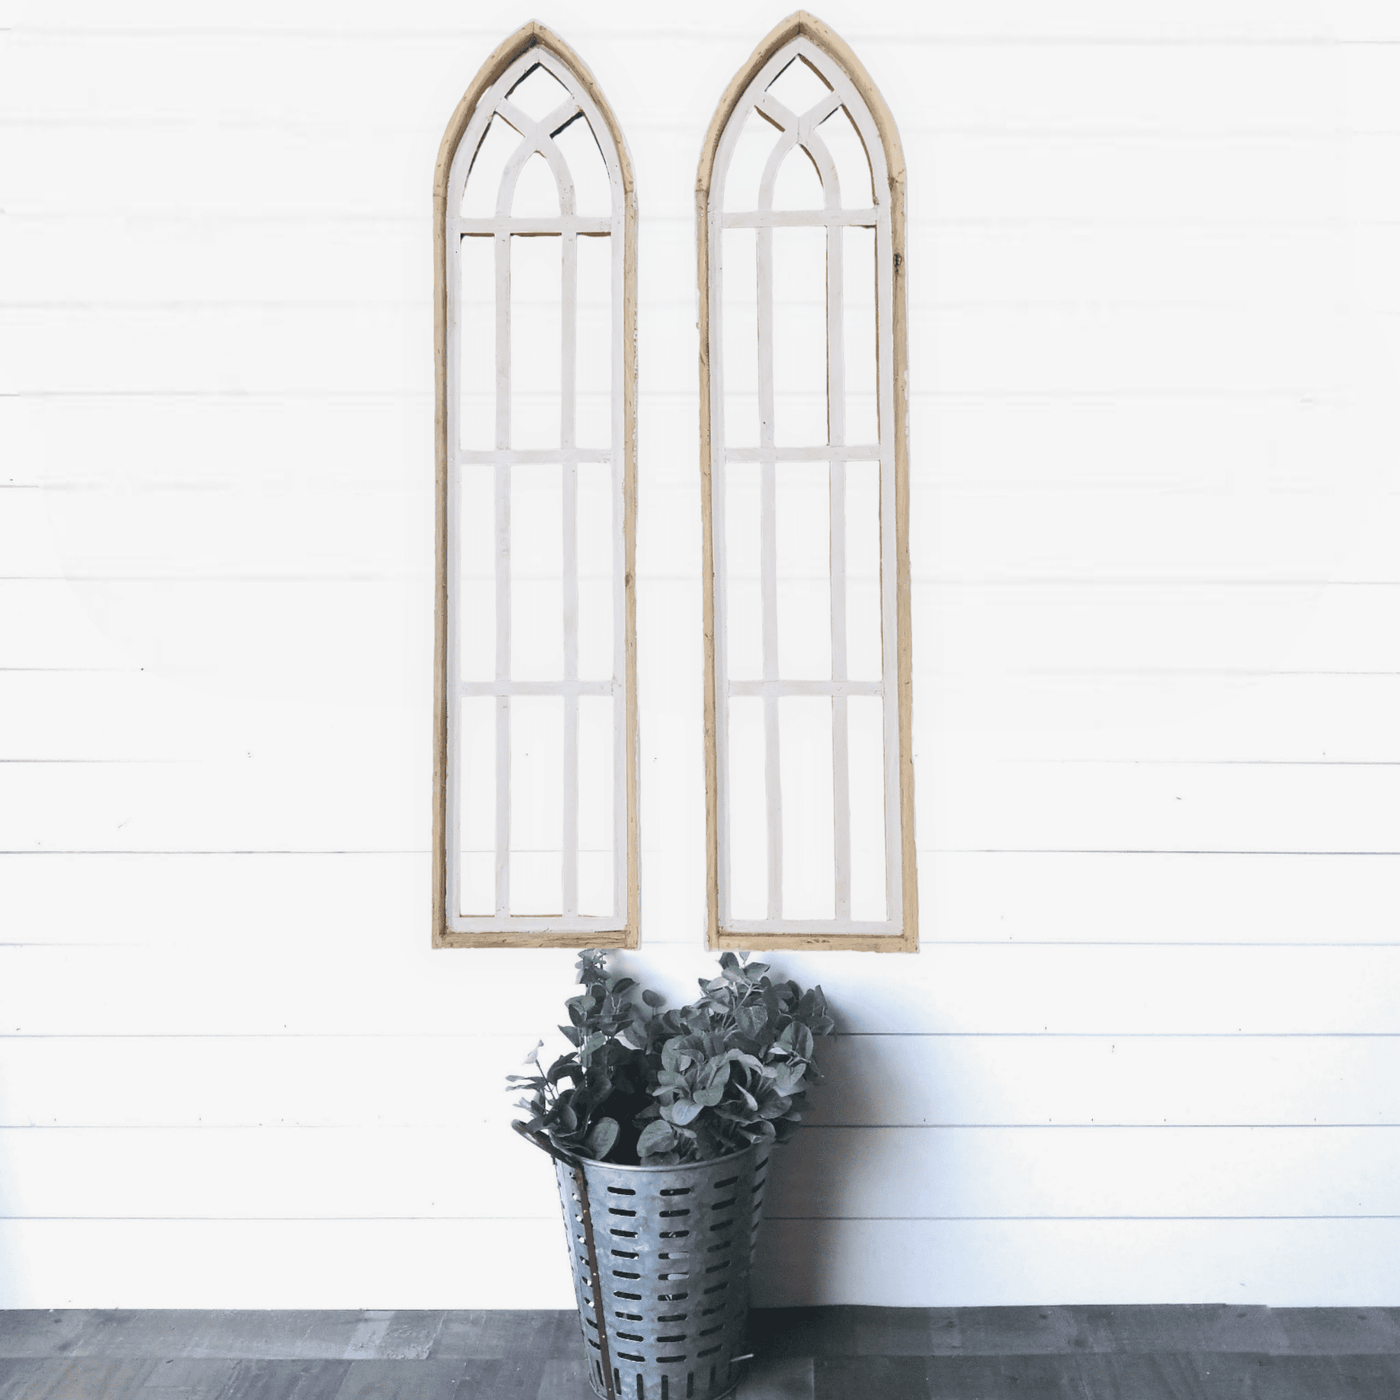 Set Of 2 White Waters Cathedral Windows - Farmhouse Cathedral Windows Rustic White 4 Sizes wall windowsRanch Junkie